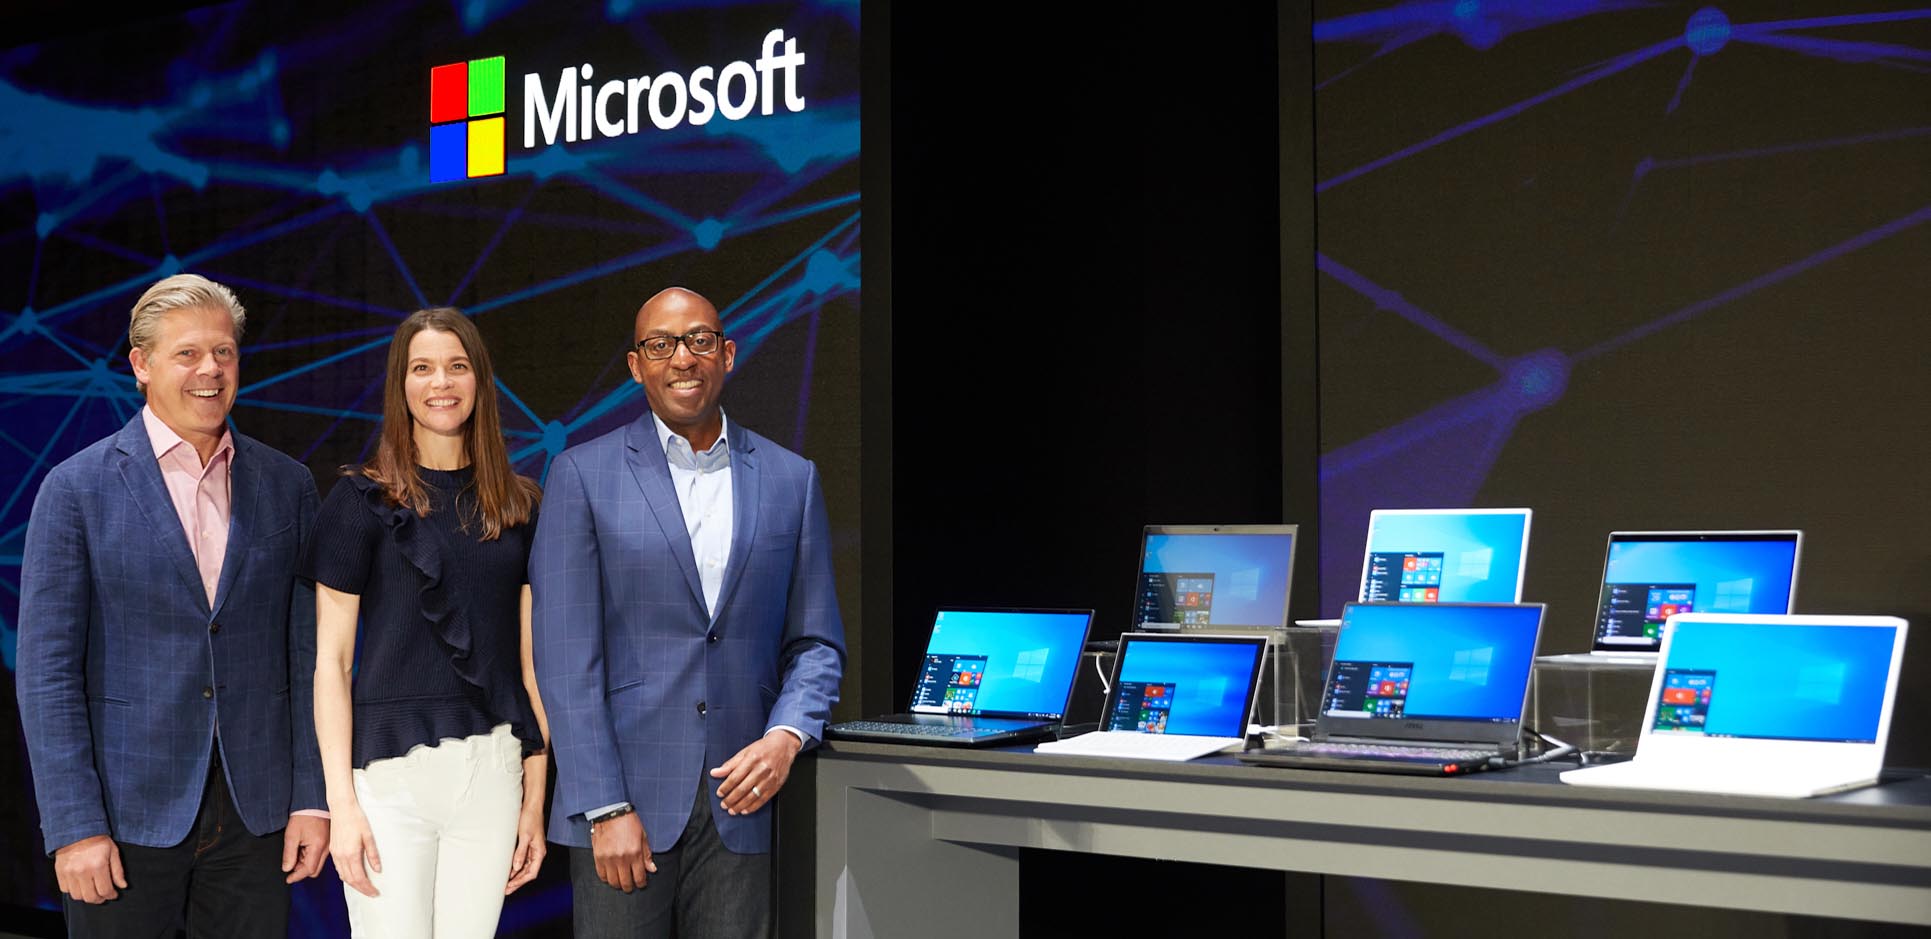 Nick Parker, Roanne Sones and Rodney Clark standing on a stage at Computex 2019 next to a table of PC laptops